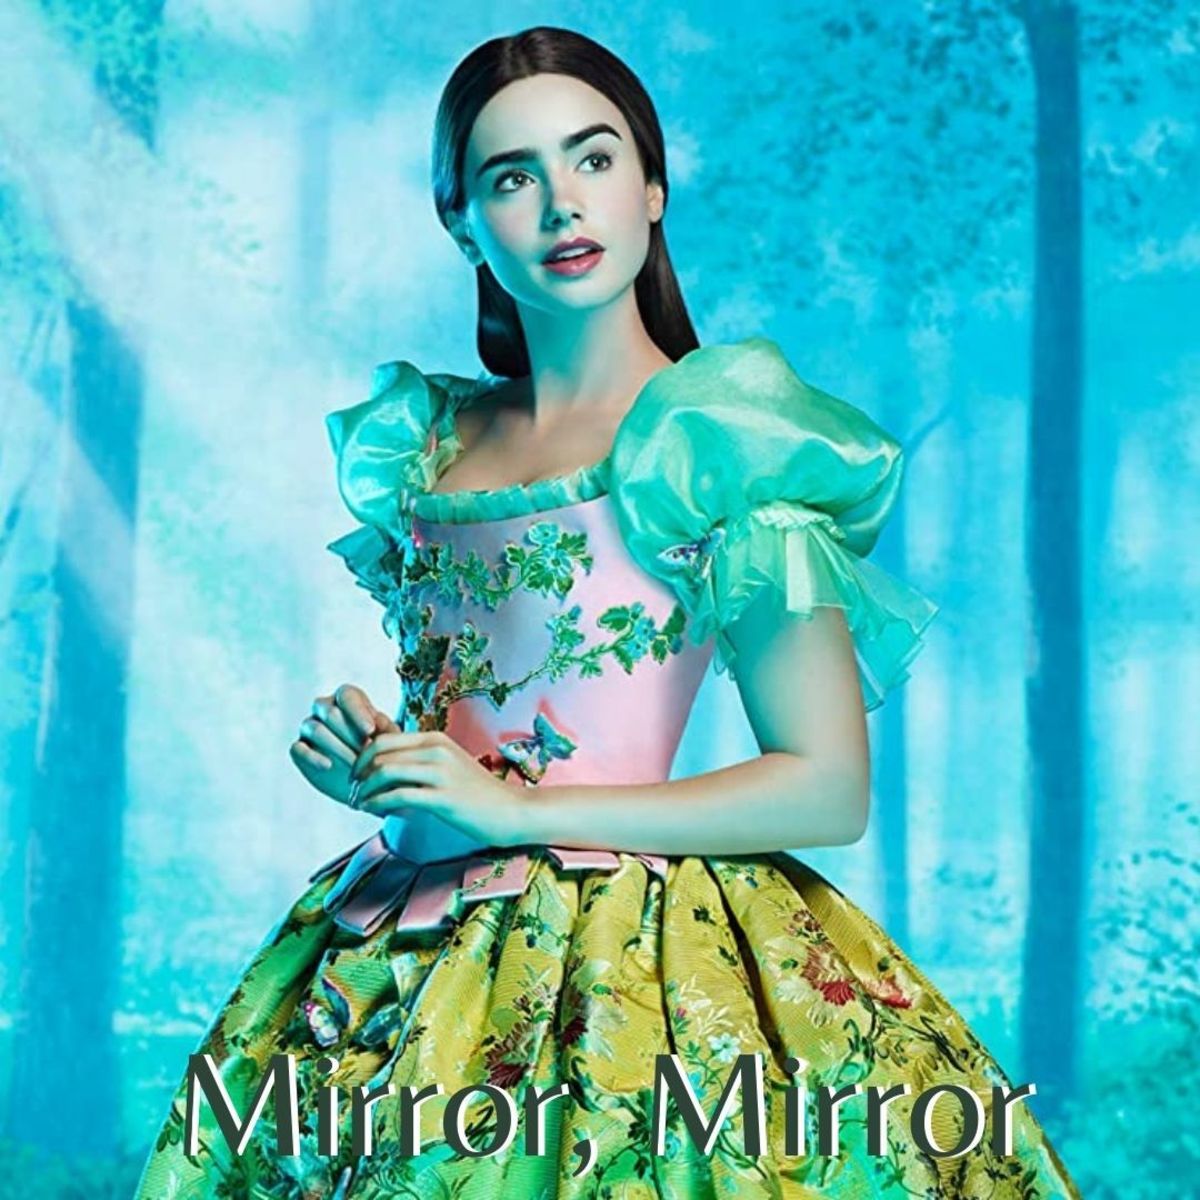 Lily Collins as Snow White in Mirror, Mirror. Probably the prettiest of all the six versions of Snow White released in 2012